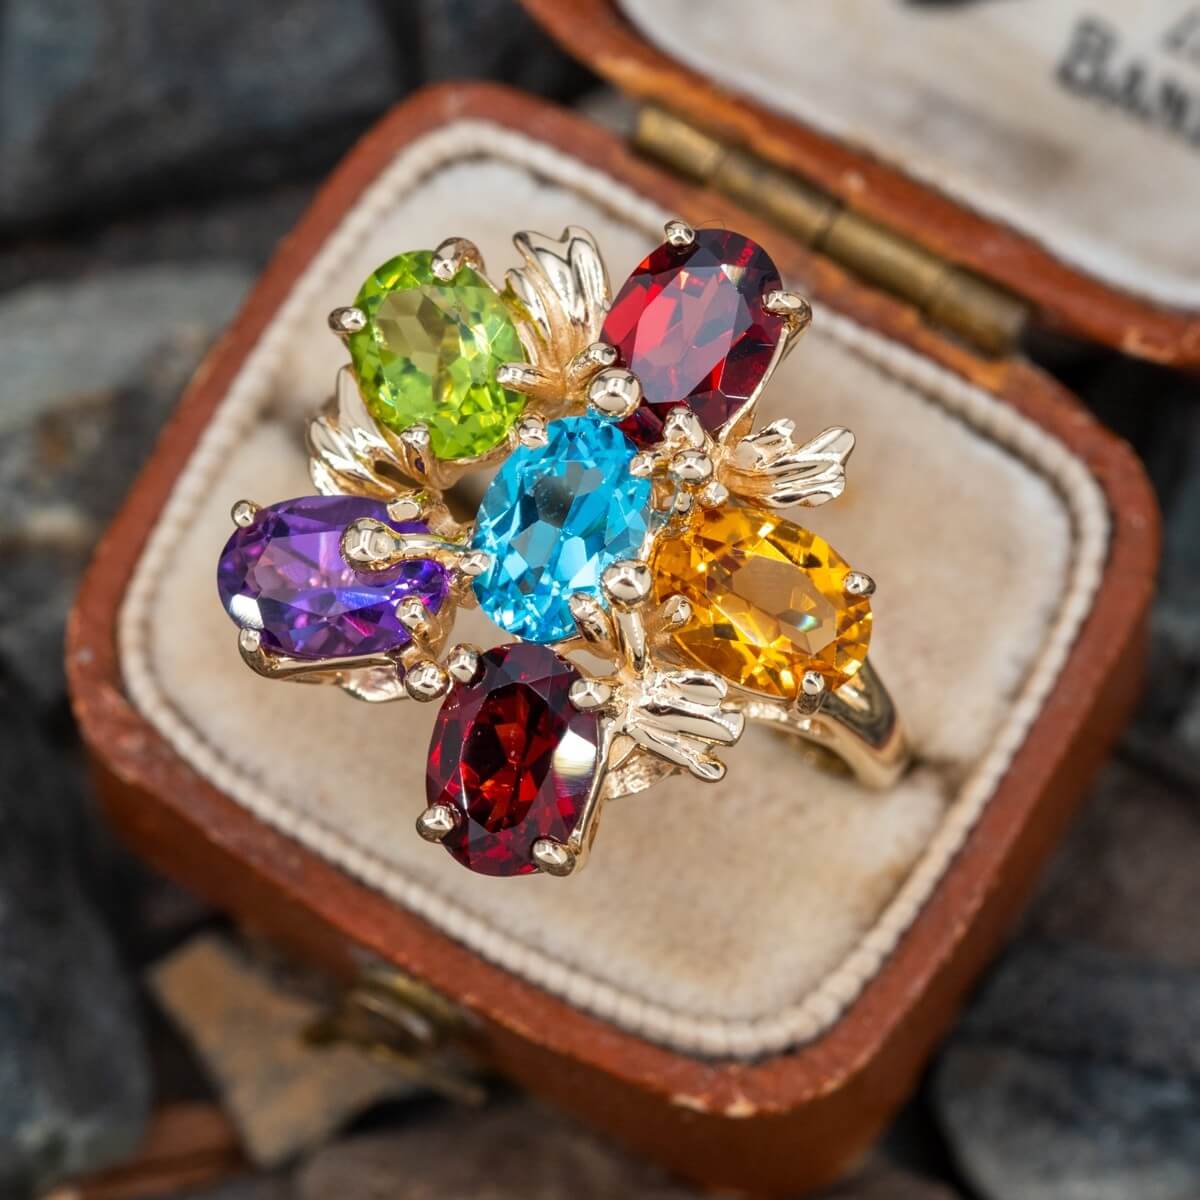 How to Care for Gemstone Rings